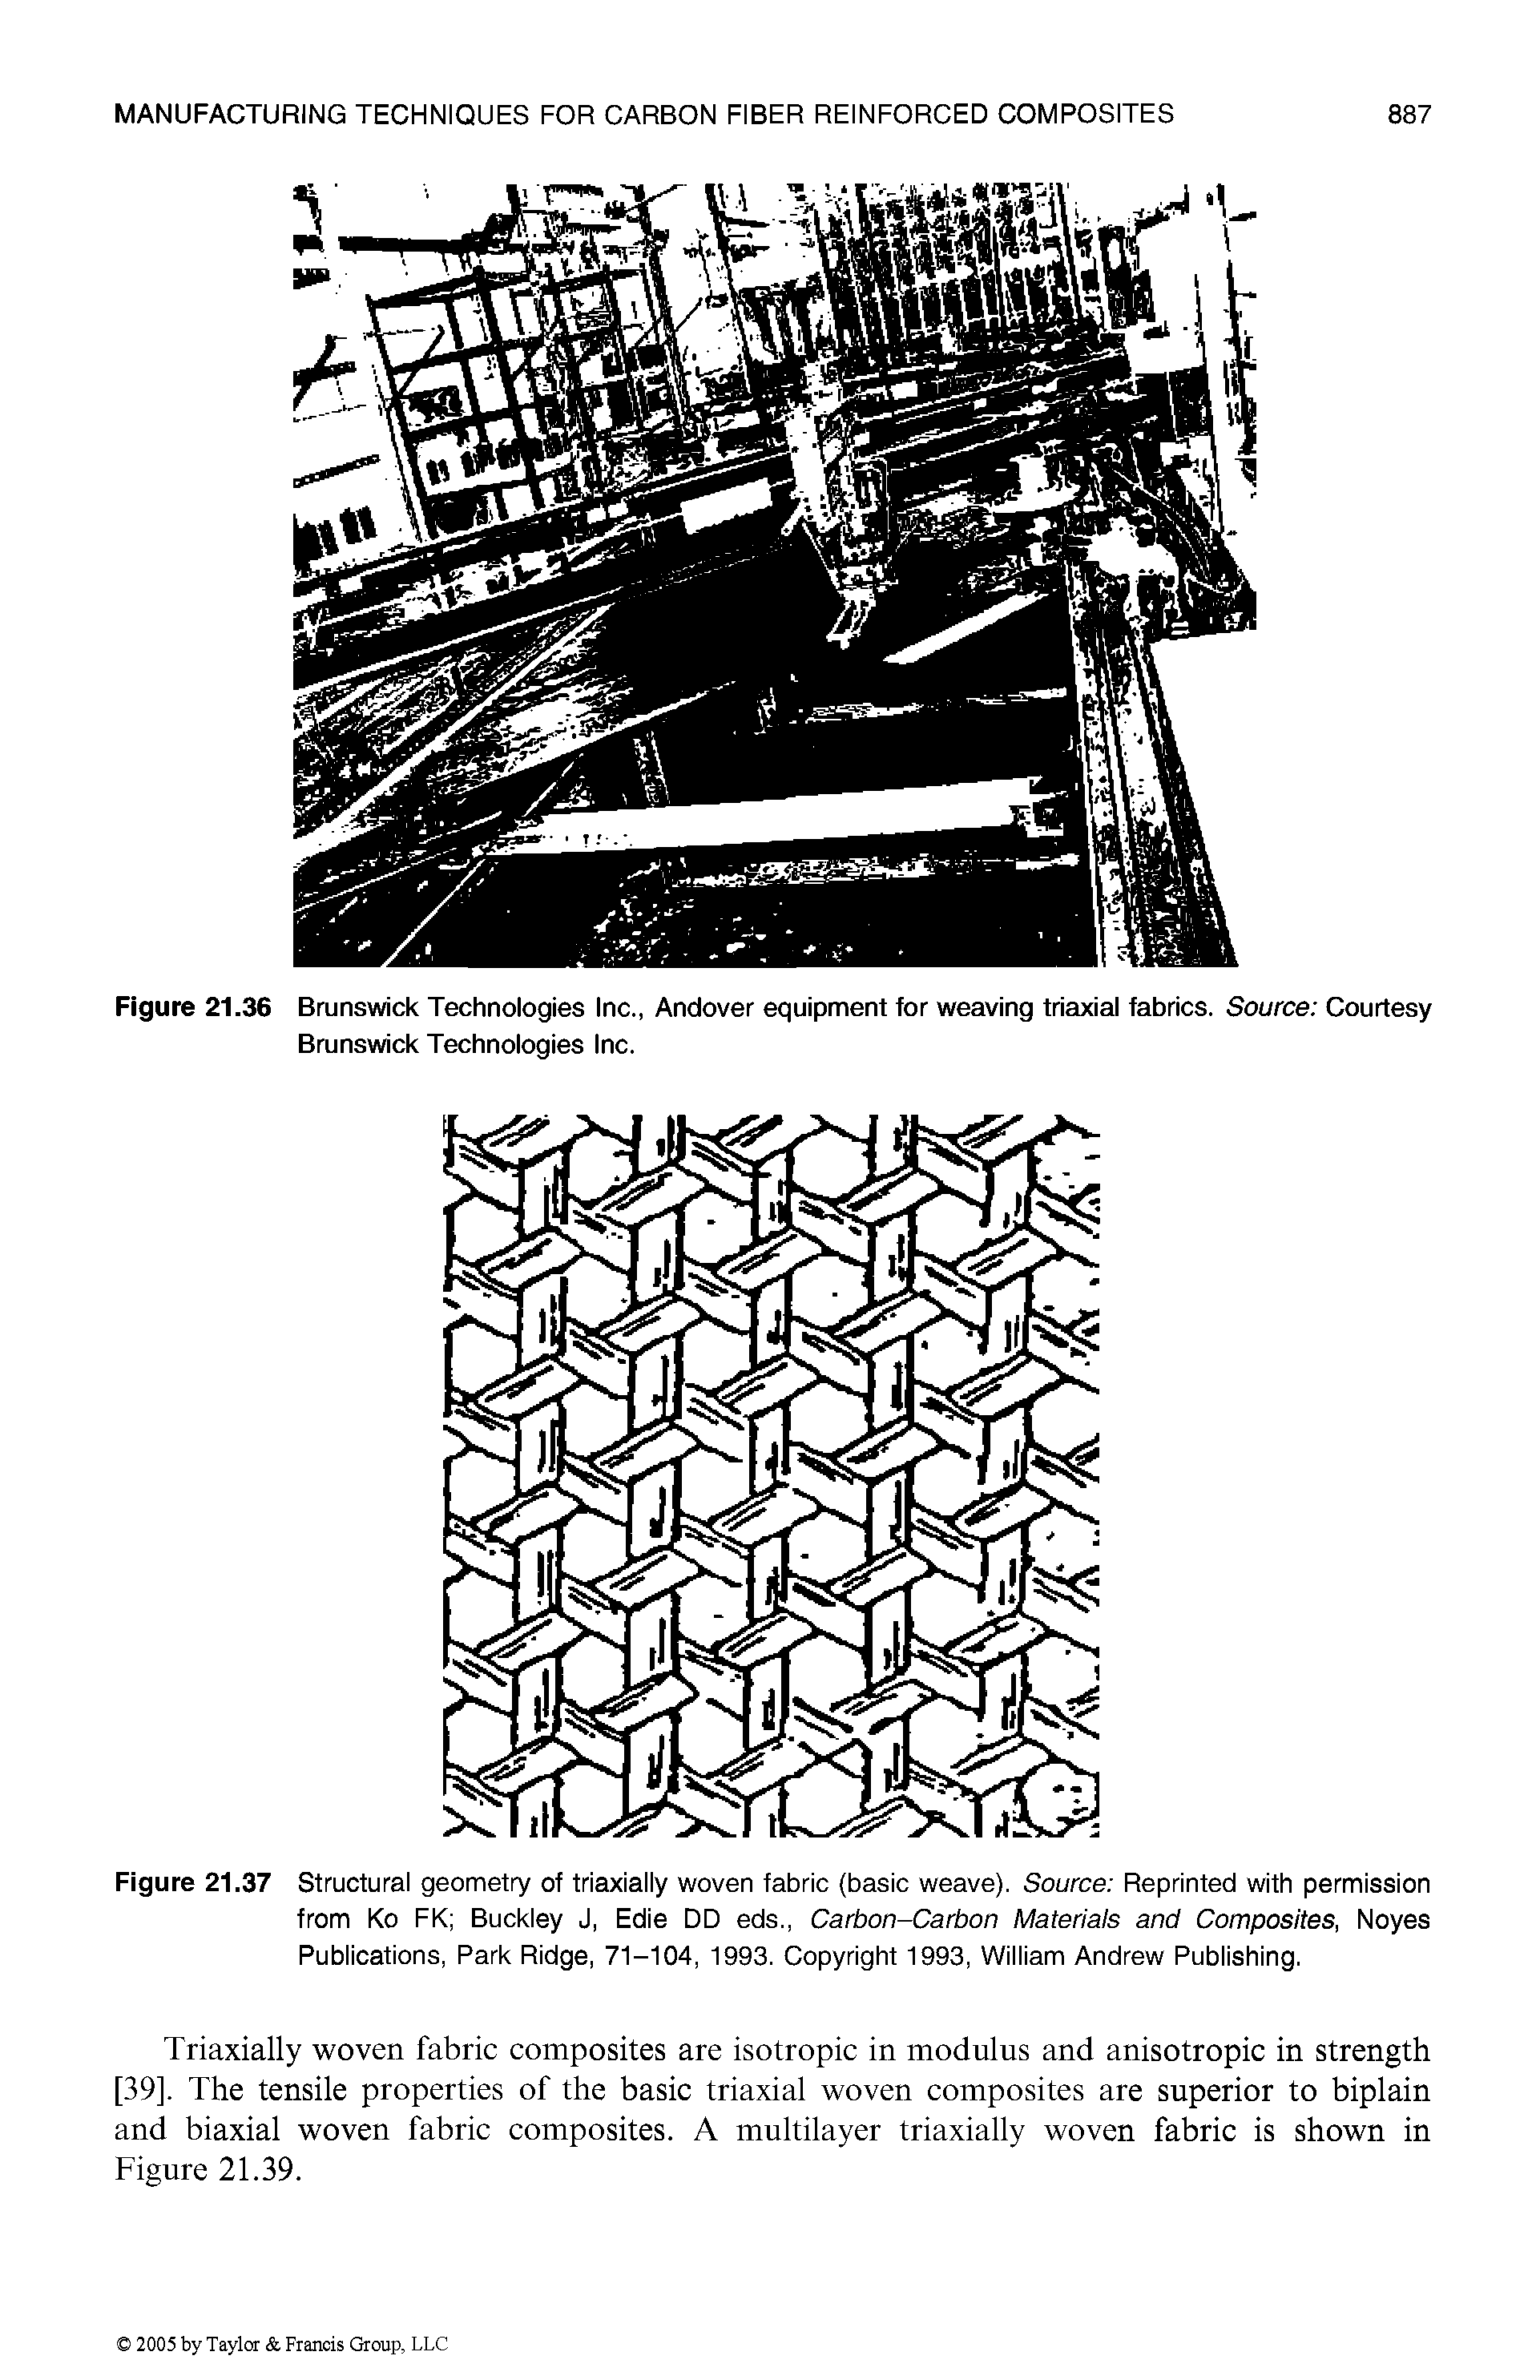 Figure 21.37 Structural geometry of triaxially woven fabric (basic weave). Source Reprinted with permission from Ko FK Buckley J, Edie DD eds., Carbon-Carbon Materials and Composites, Noyes Publications, Park Ridge, 71-104, 1993. Copyright 1993, William Andrew Publishing.